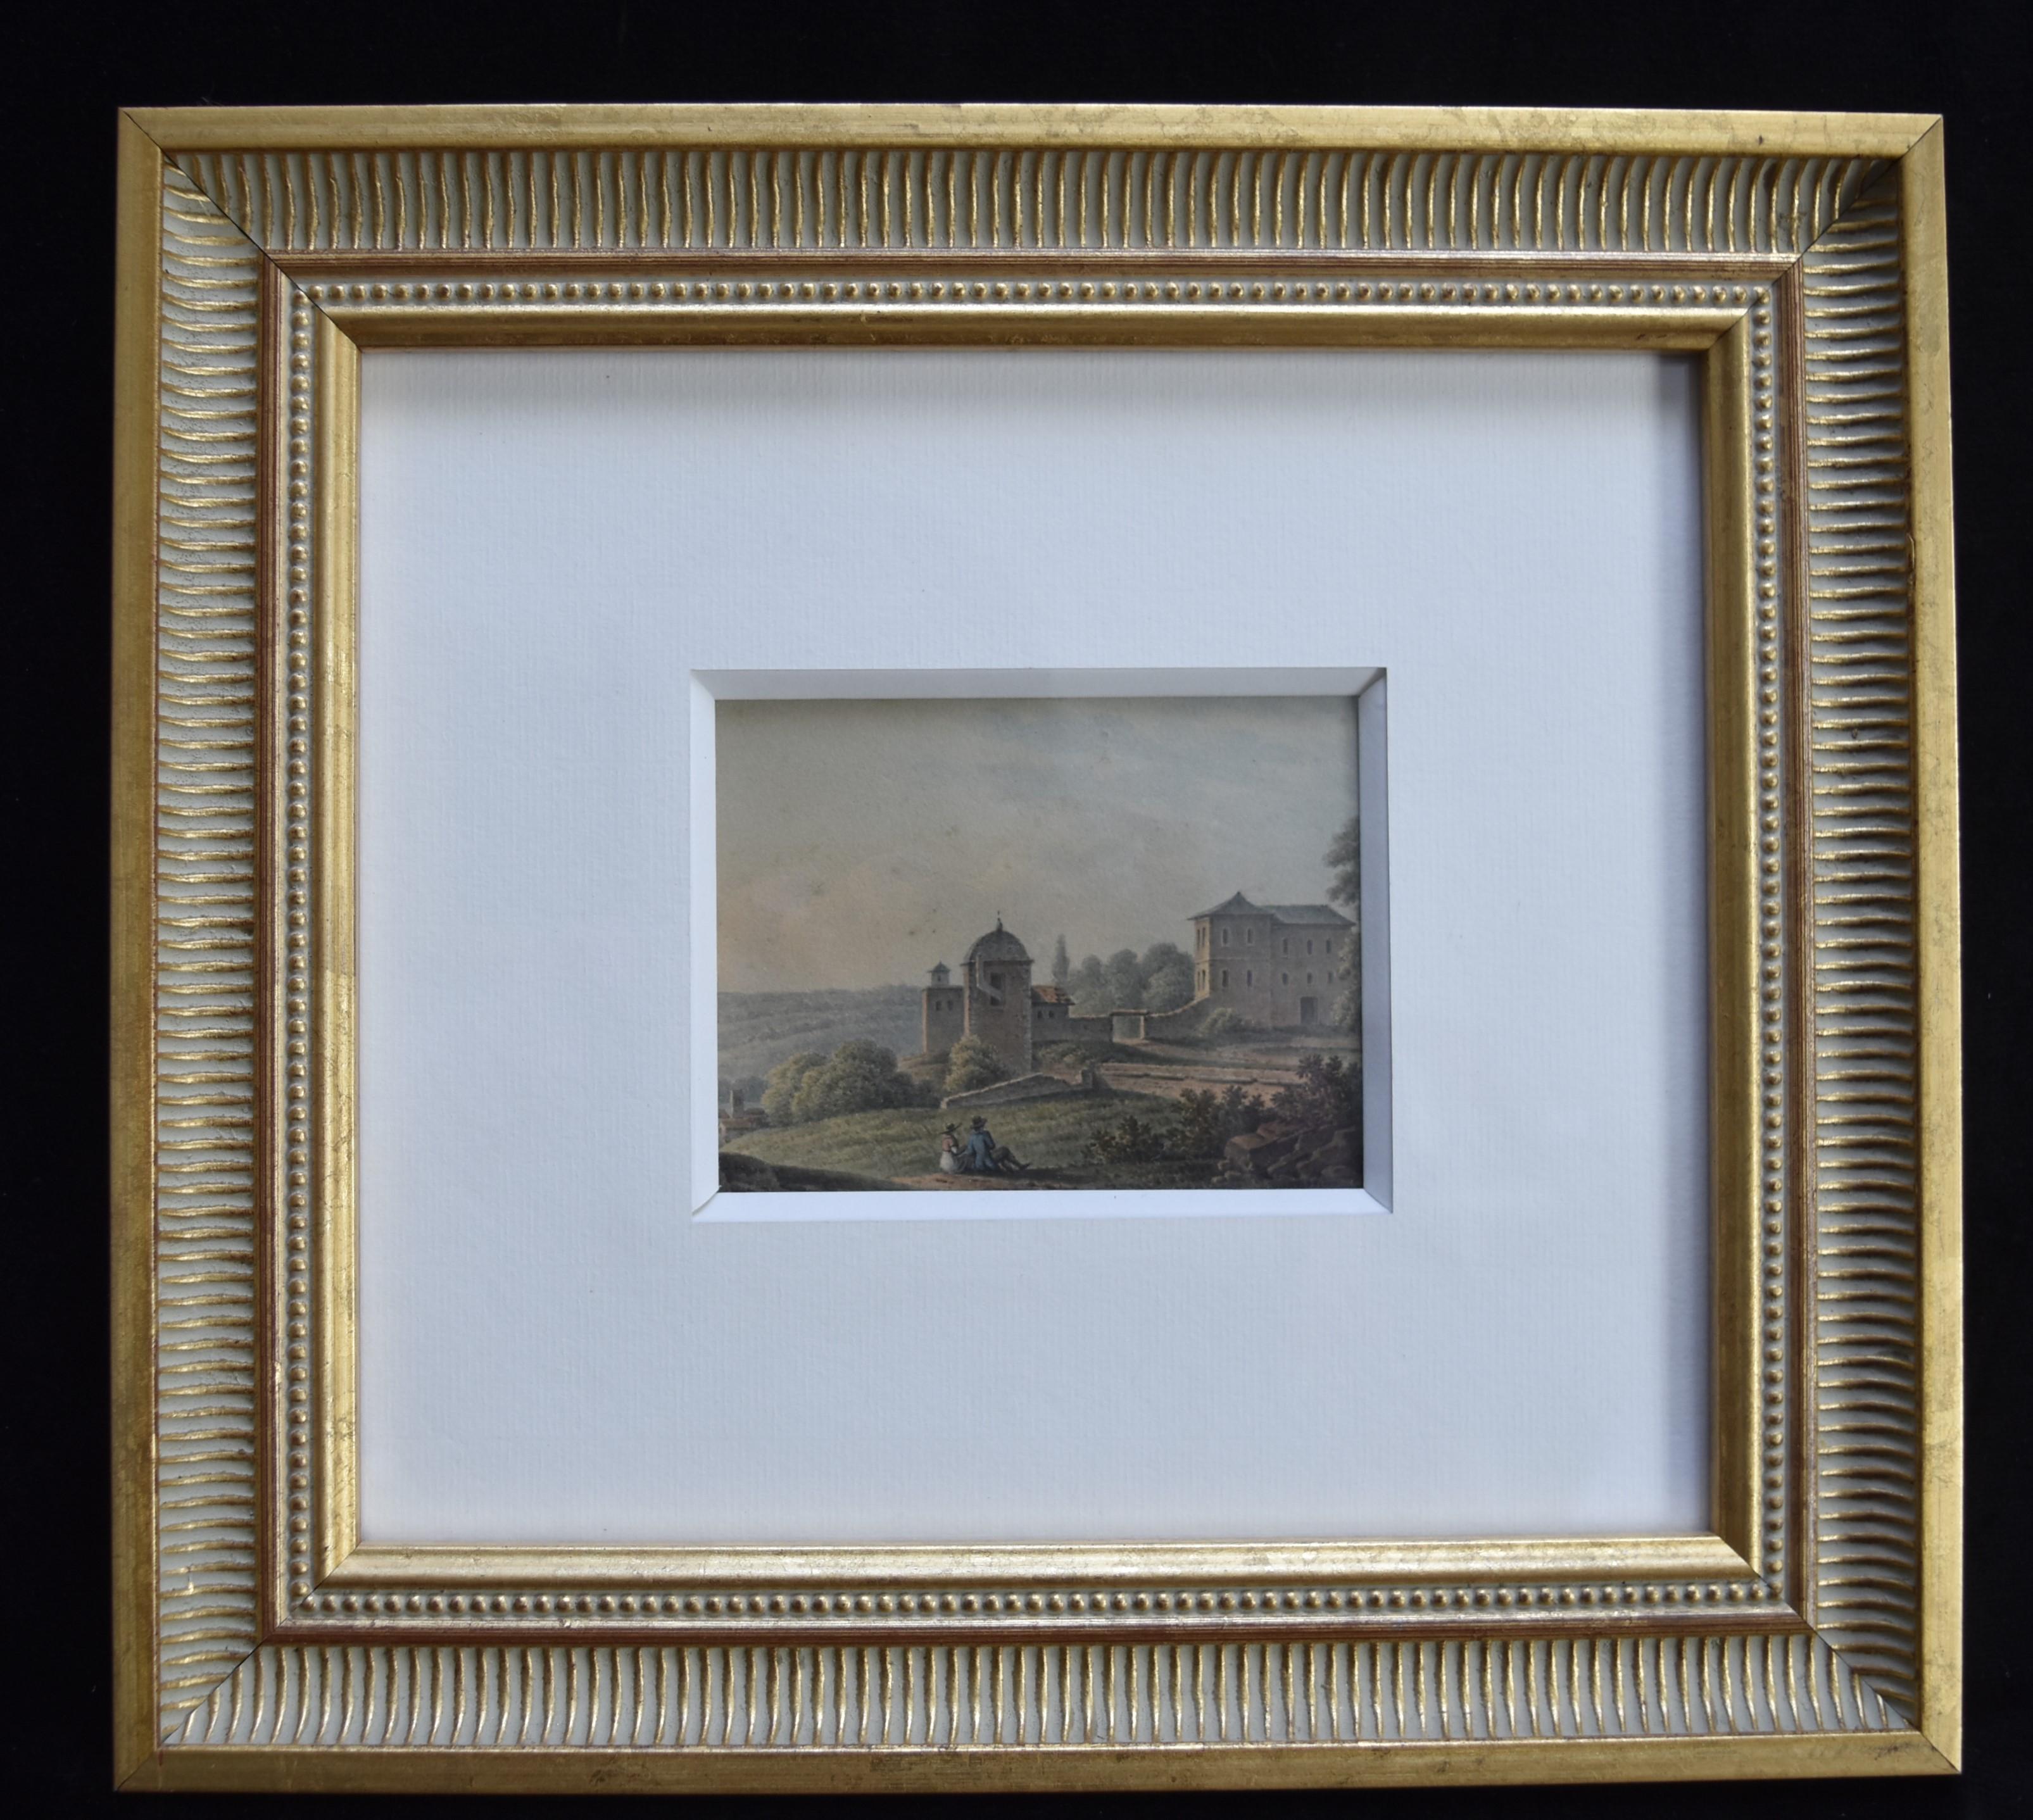 French School circa 1850
Two Views of fantasy or Capriccios, a pair
Watercolor on paper
8 x 10 cm (view) x 2
In modern frames : 26 x 28.5 cm
in good condition, some very little stains on the second one (see photo)

Charming and mysterious surrealist